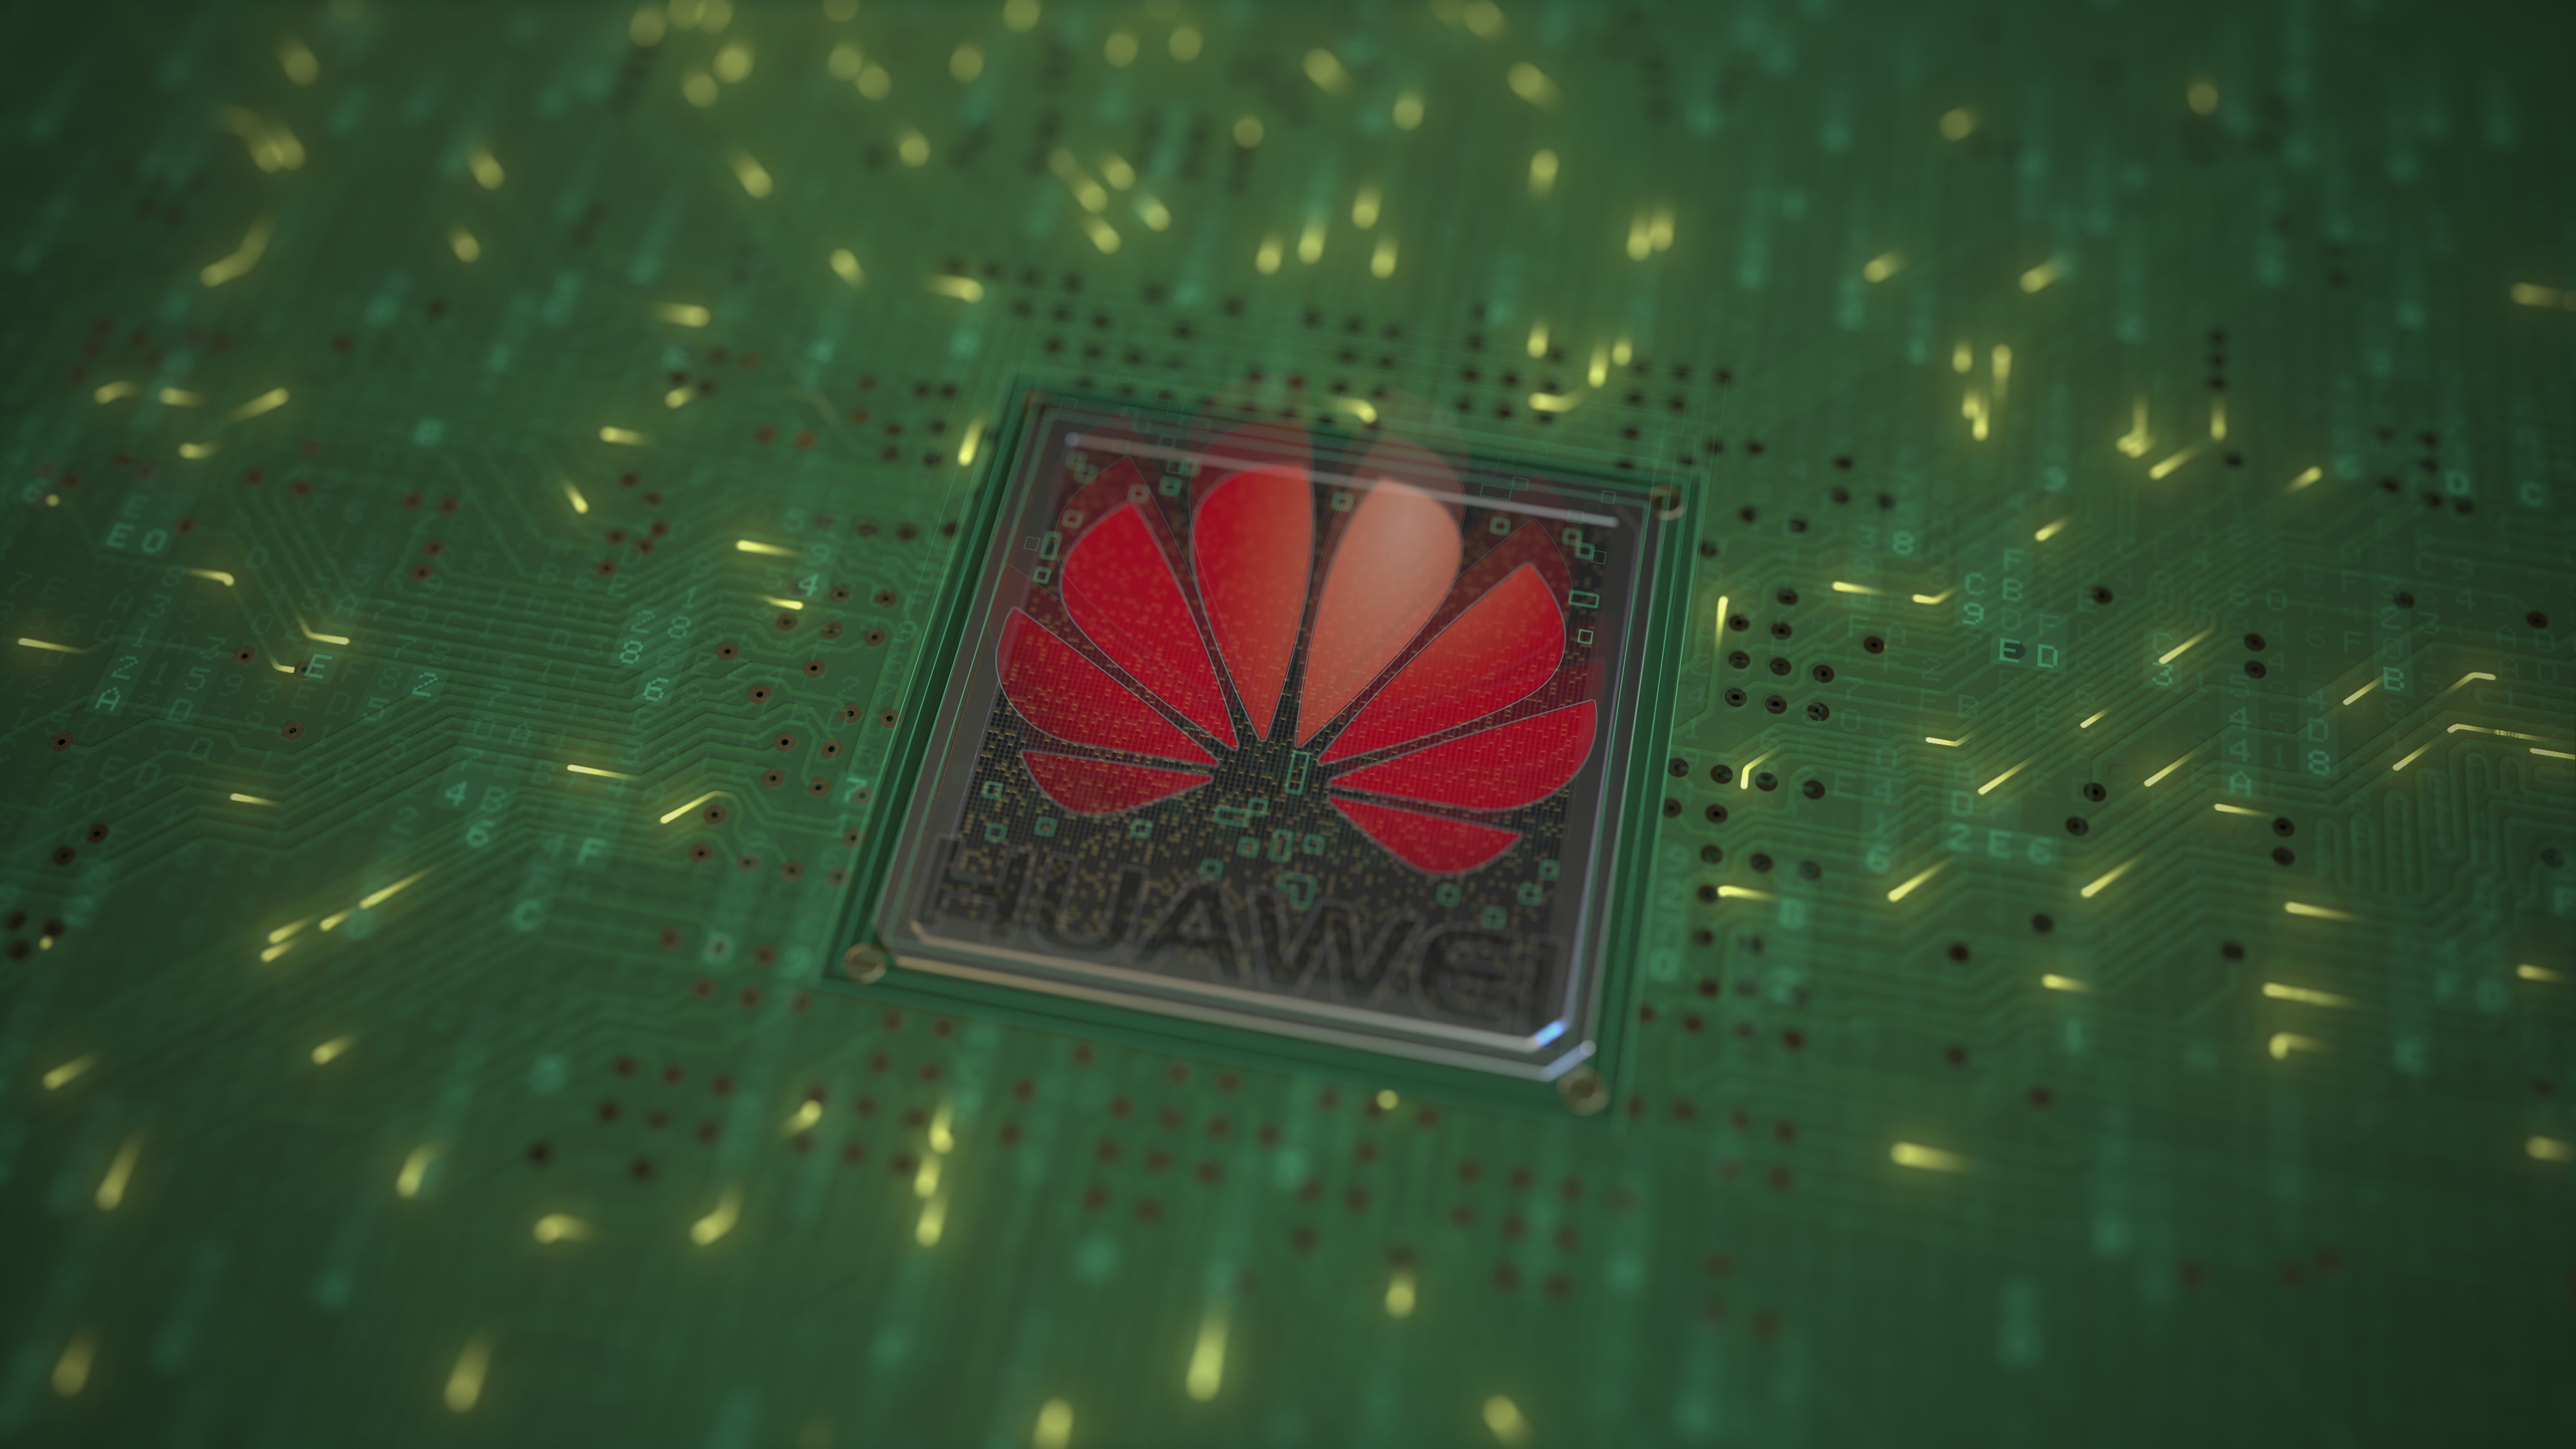 Huawei Technologies Co has struggled to get new in-house-designed smartphone chips made by major semiconductor foundries because of tightened US trade sanctions. Photo: Shutterstock